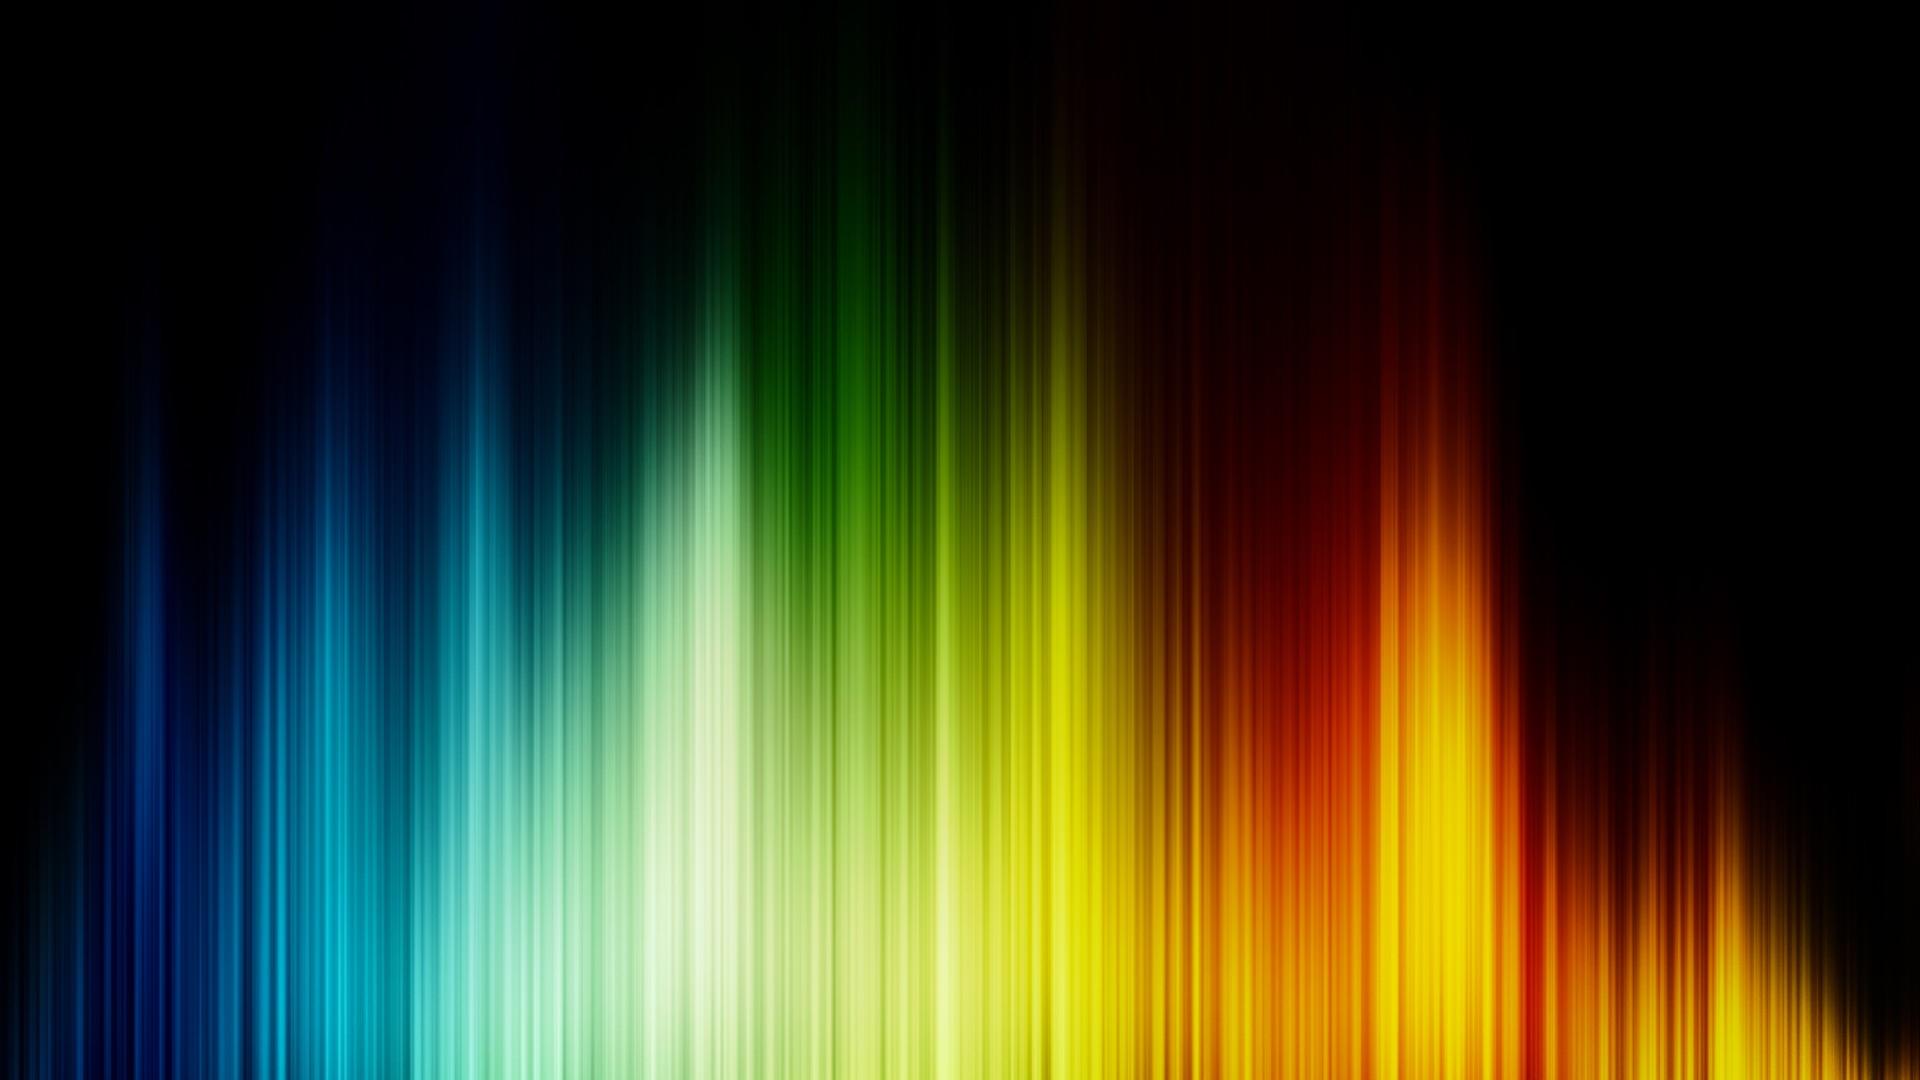 Abstract Colors Wallpapers Full Color Wallpaper Hd wallpape 1920x1080